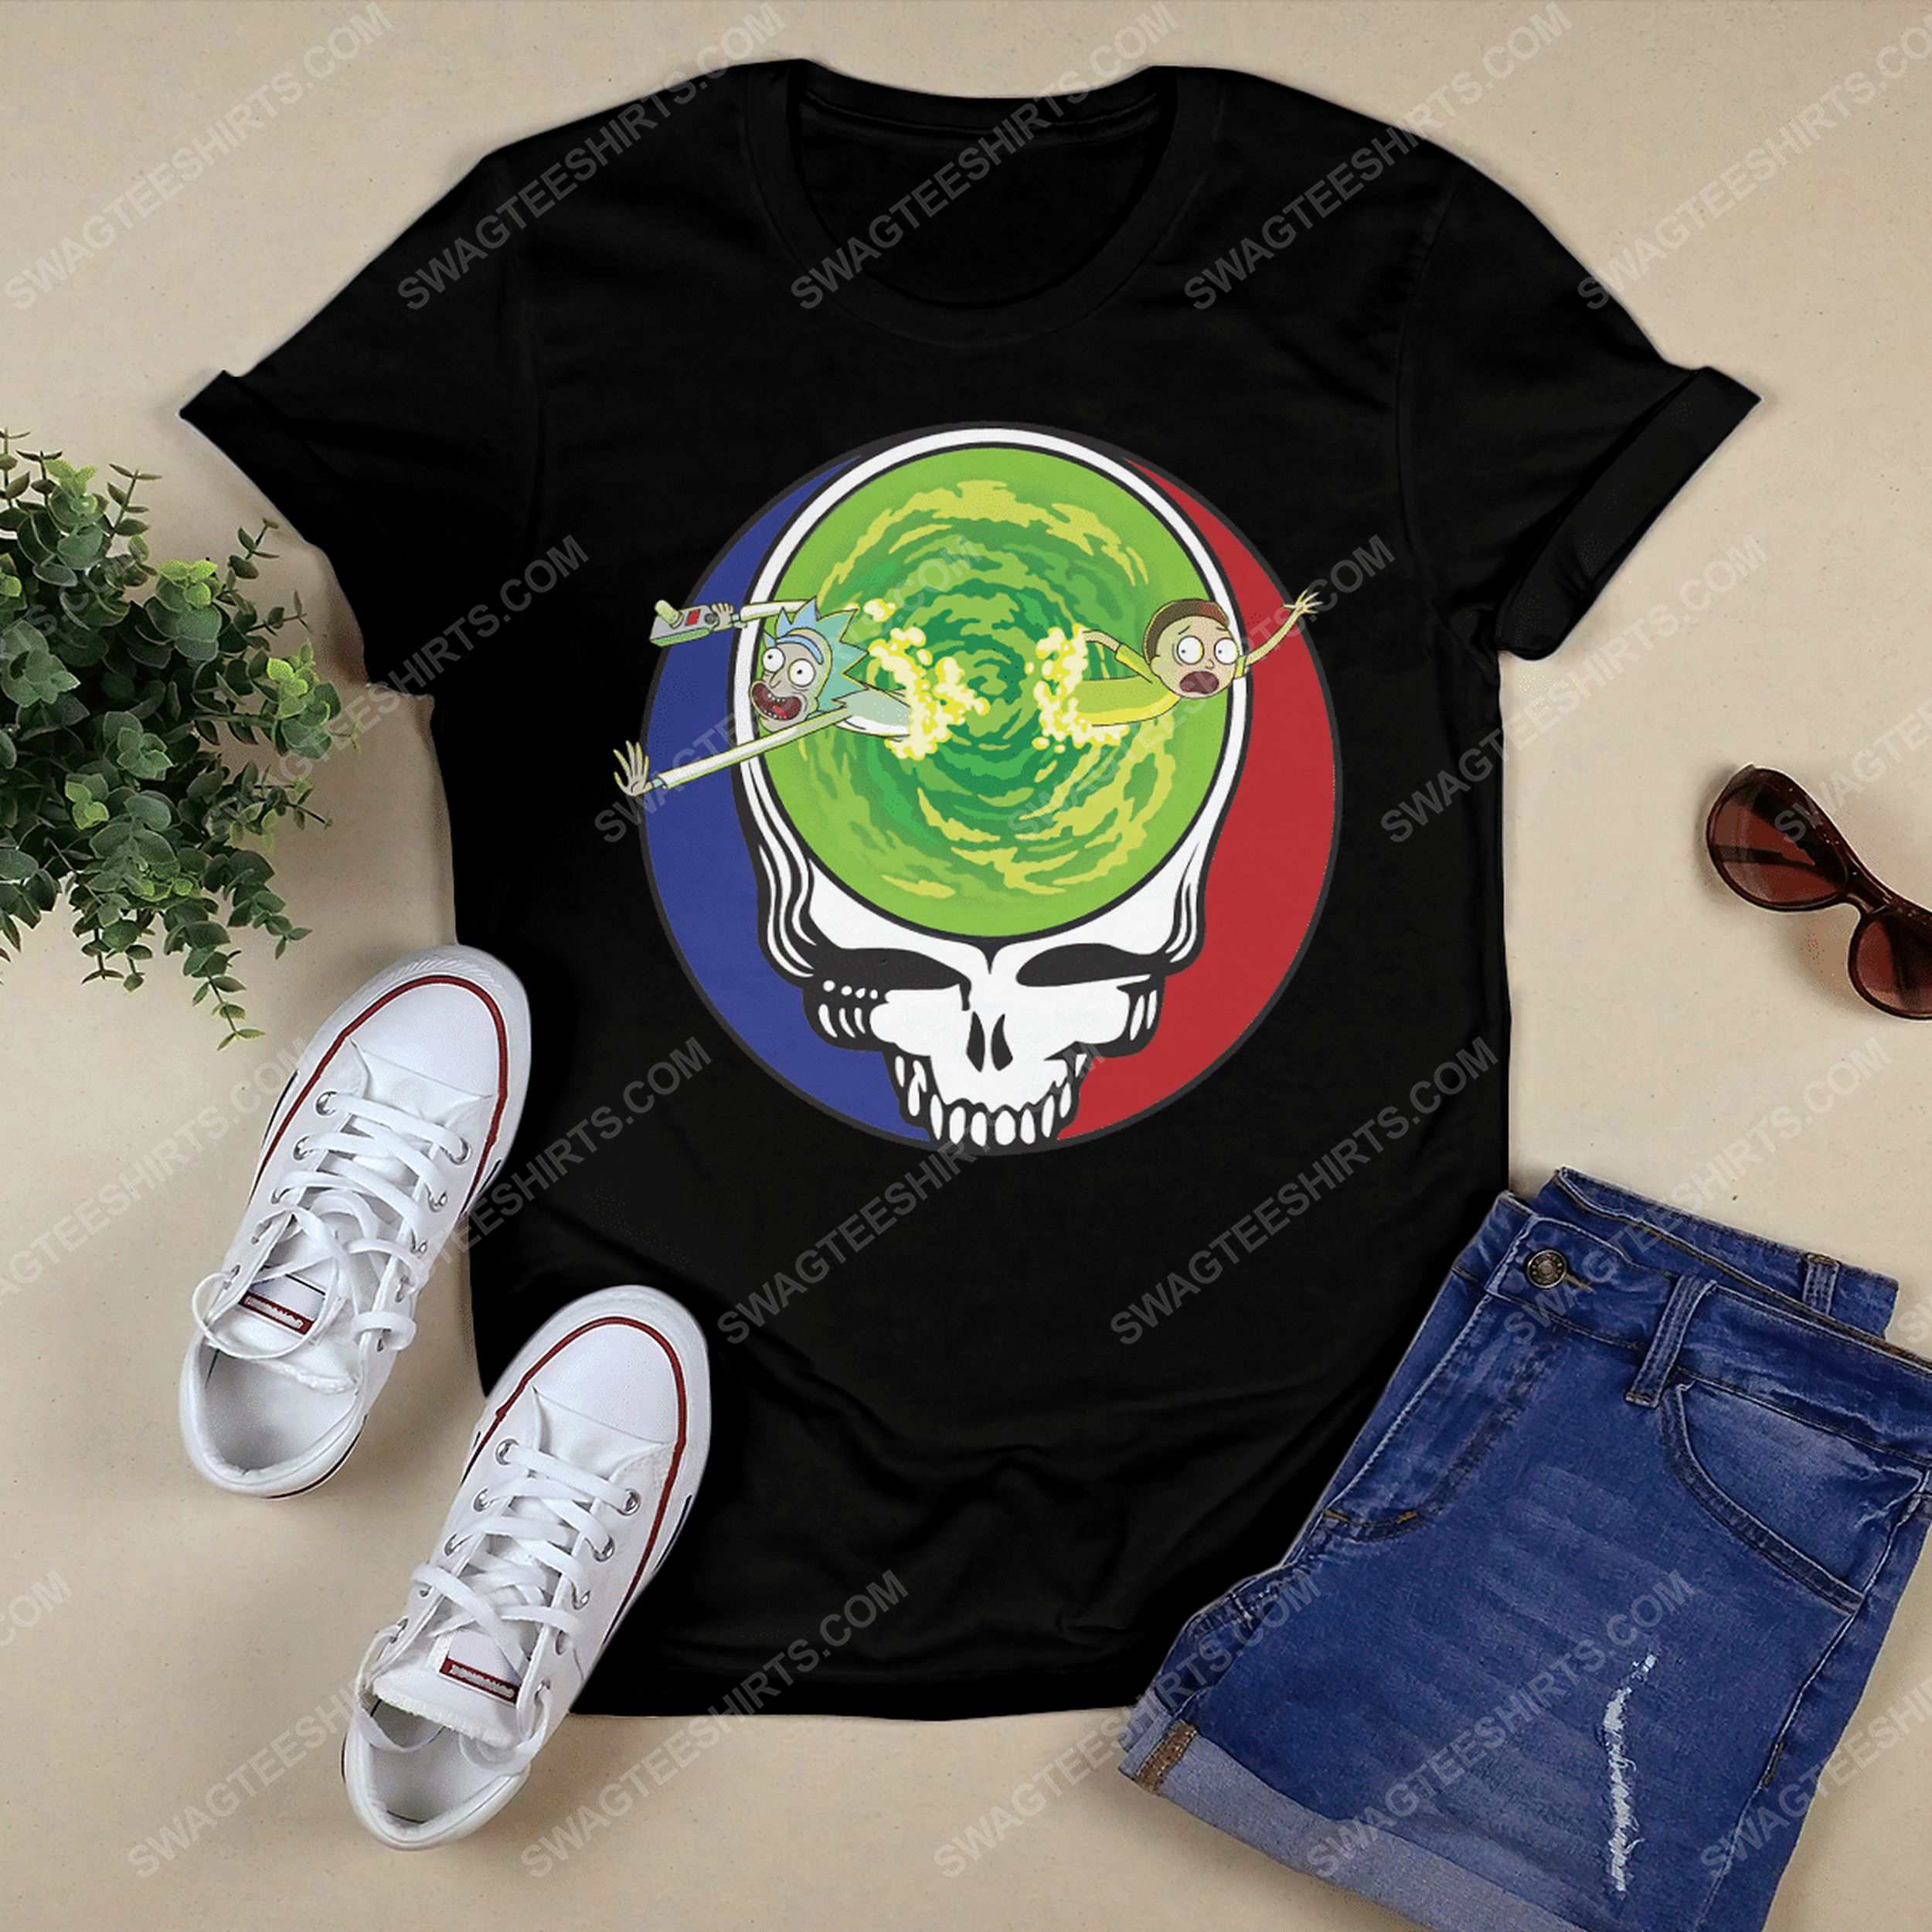 Tv show rick and morty and grateful dead rock band shirt 2(1)